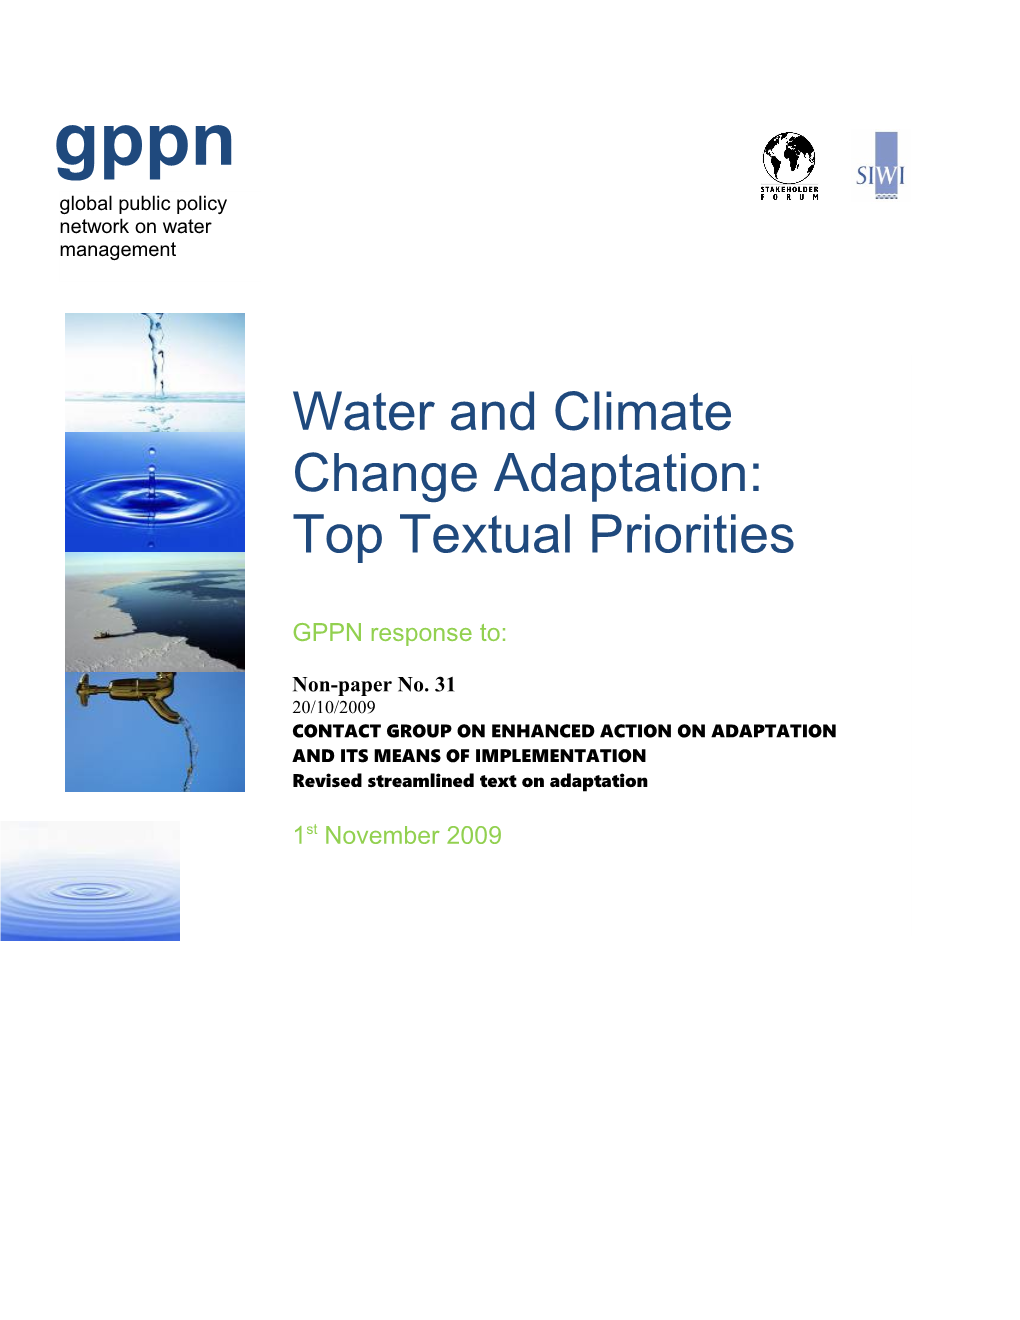 Water and Climate Change Adaptation: Top Textual Priorities